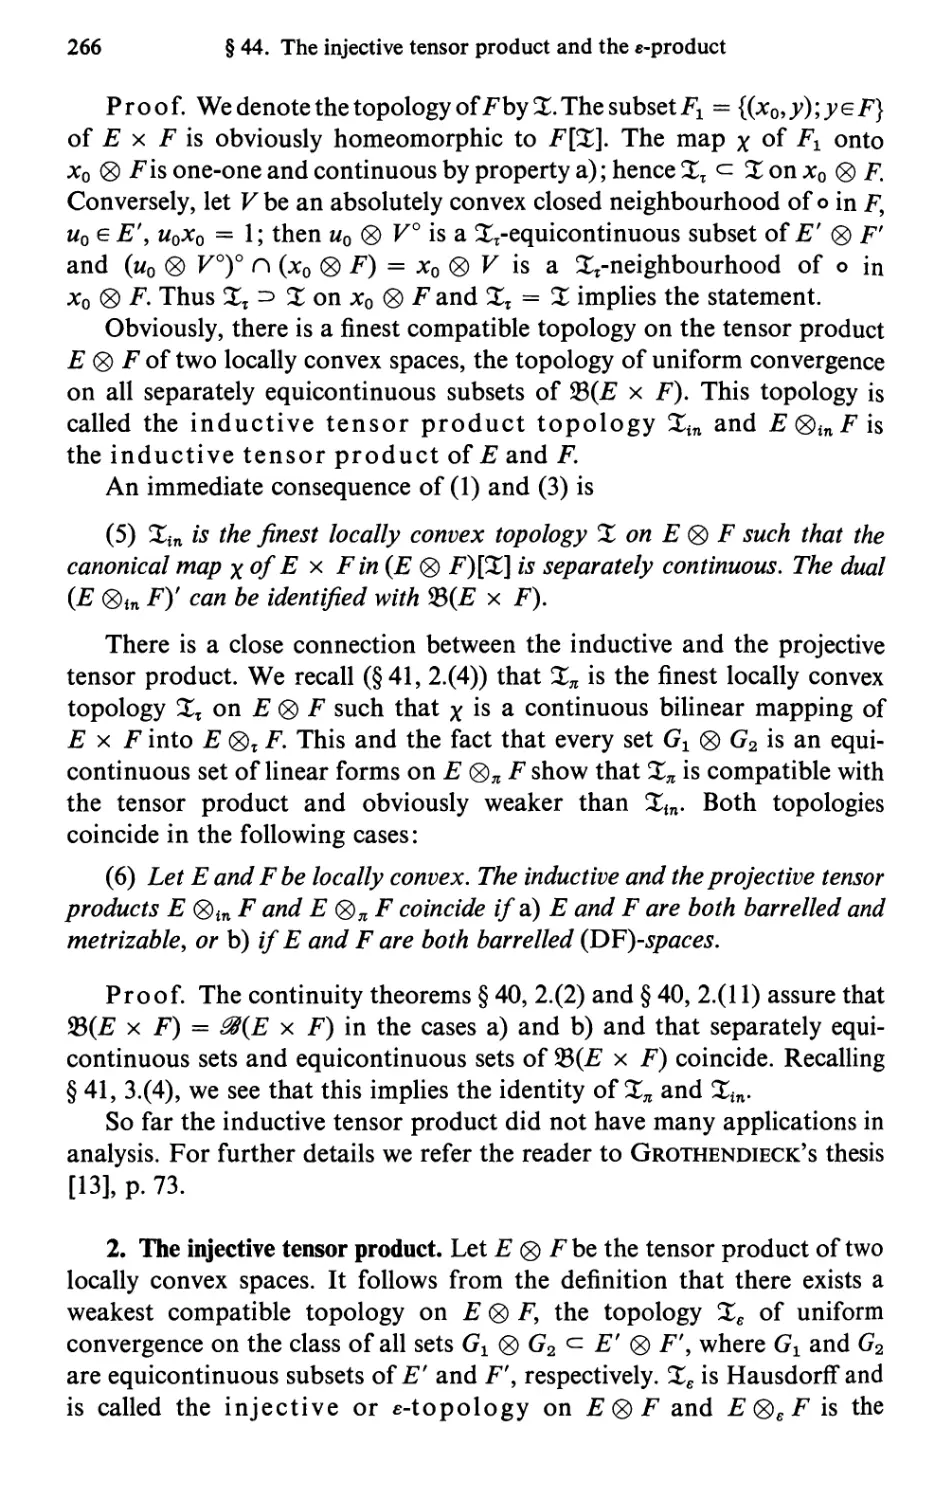 2. The injective tensor product